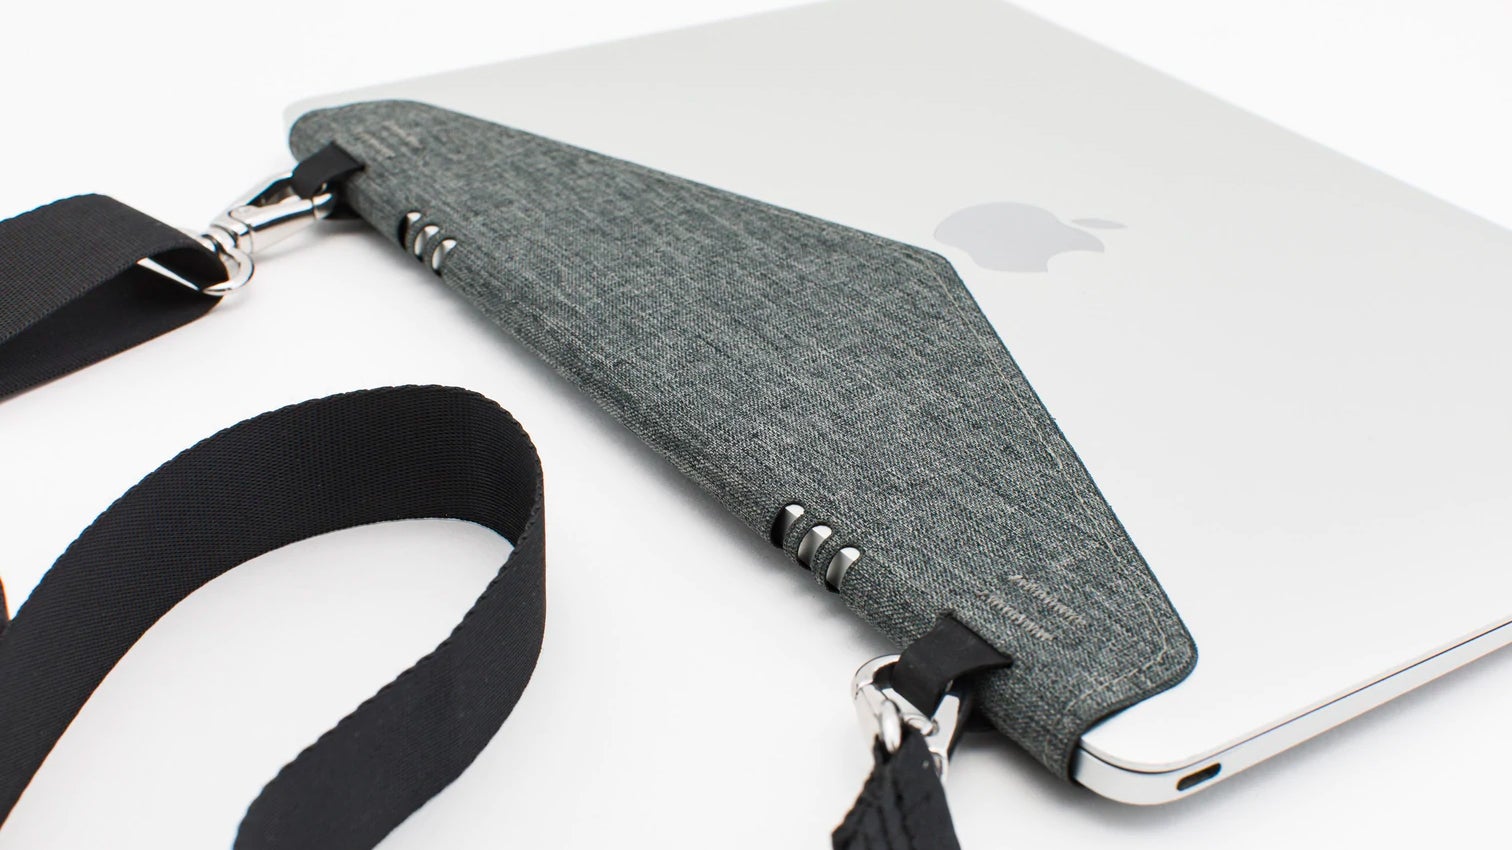 I Can’t Even Look at This Laptop-Carrying Strap Without Getting Stressed Out